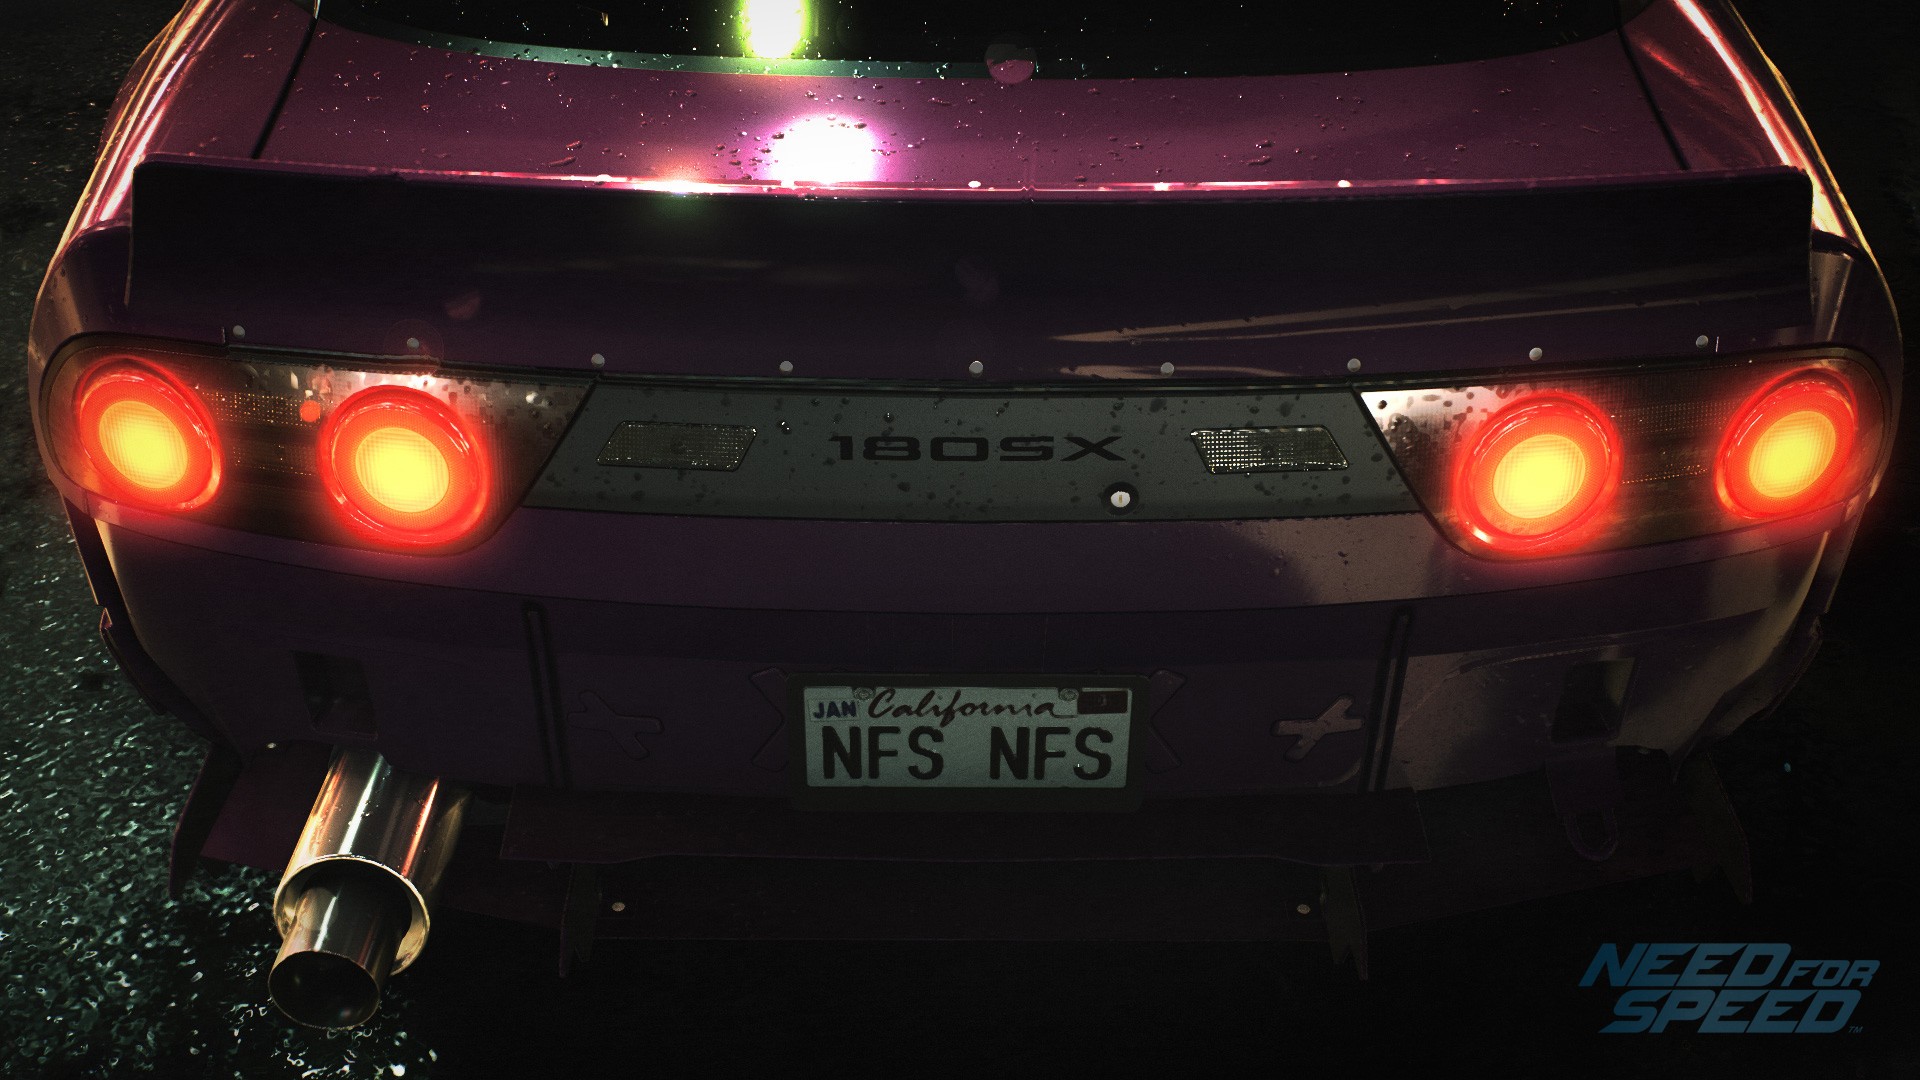 anime, Racing, Car, Video Games, Need For Speed, Nissan, Nissan 180SX Wallpaper